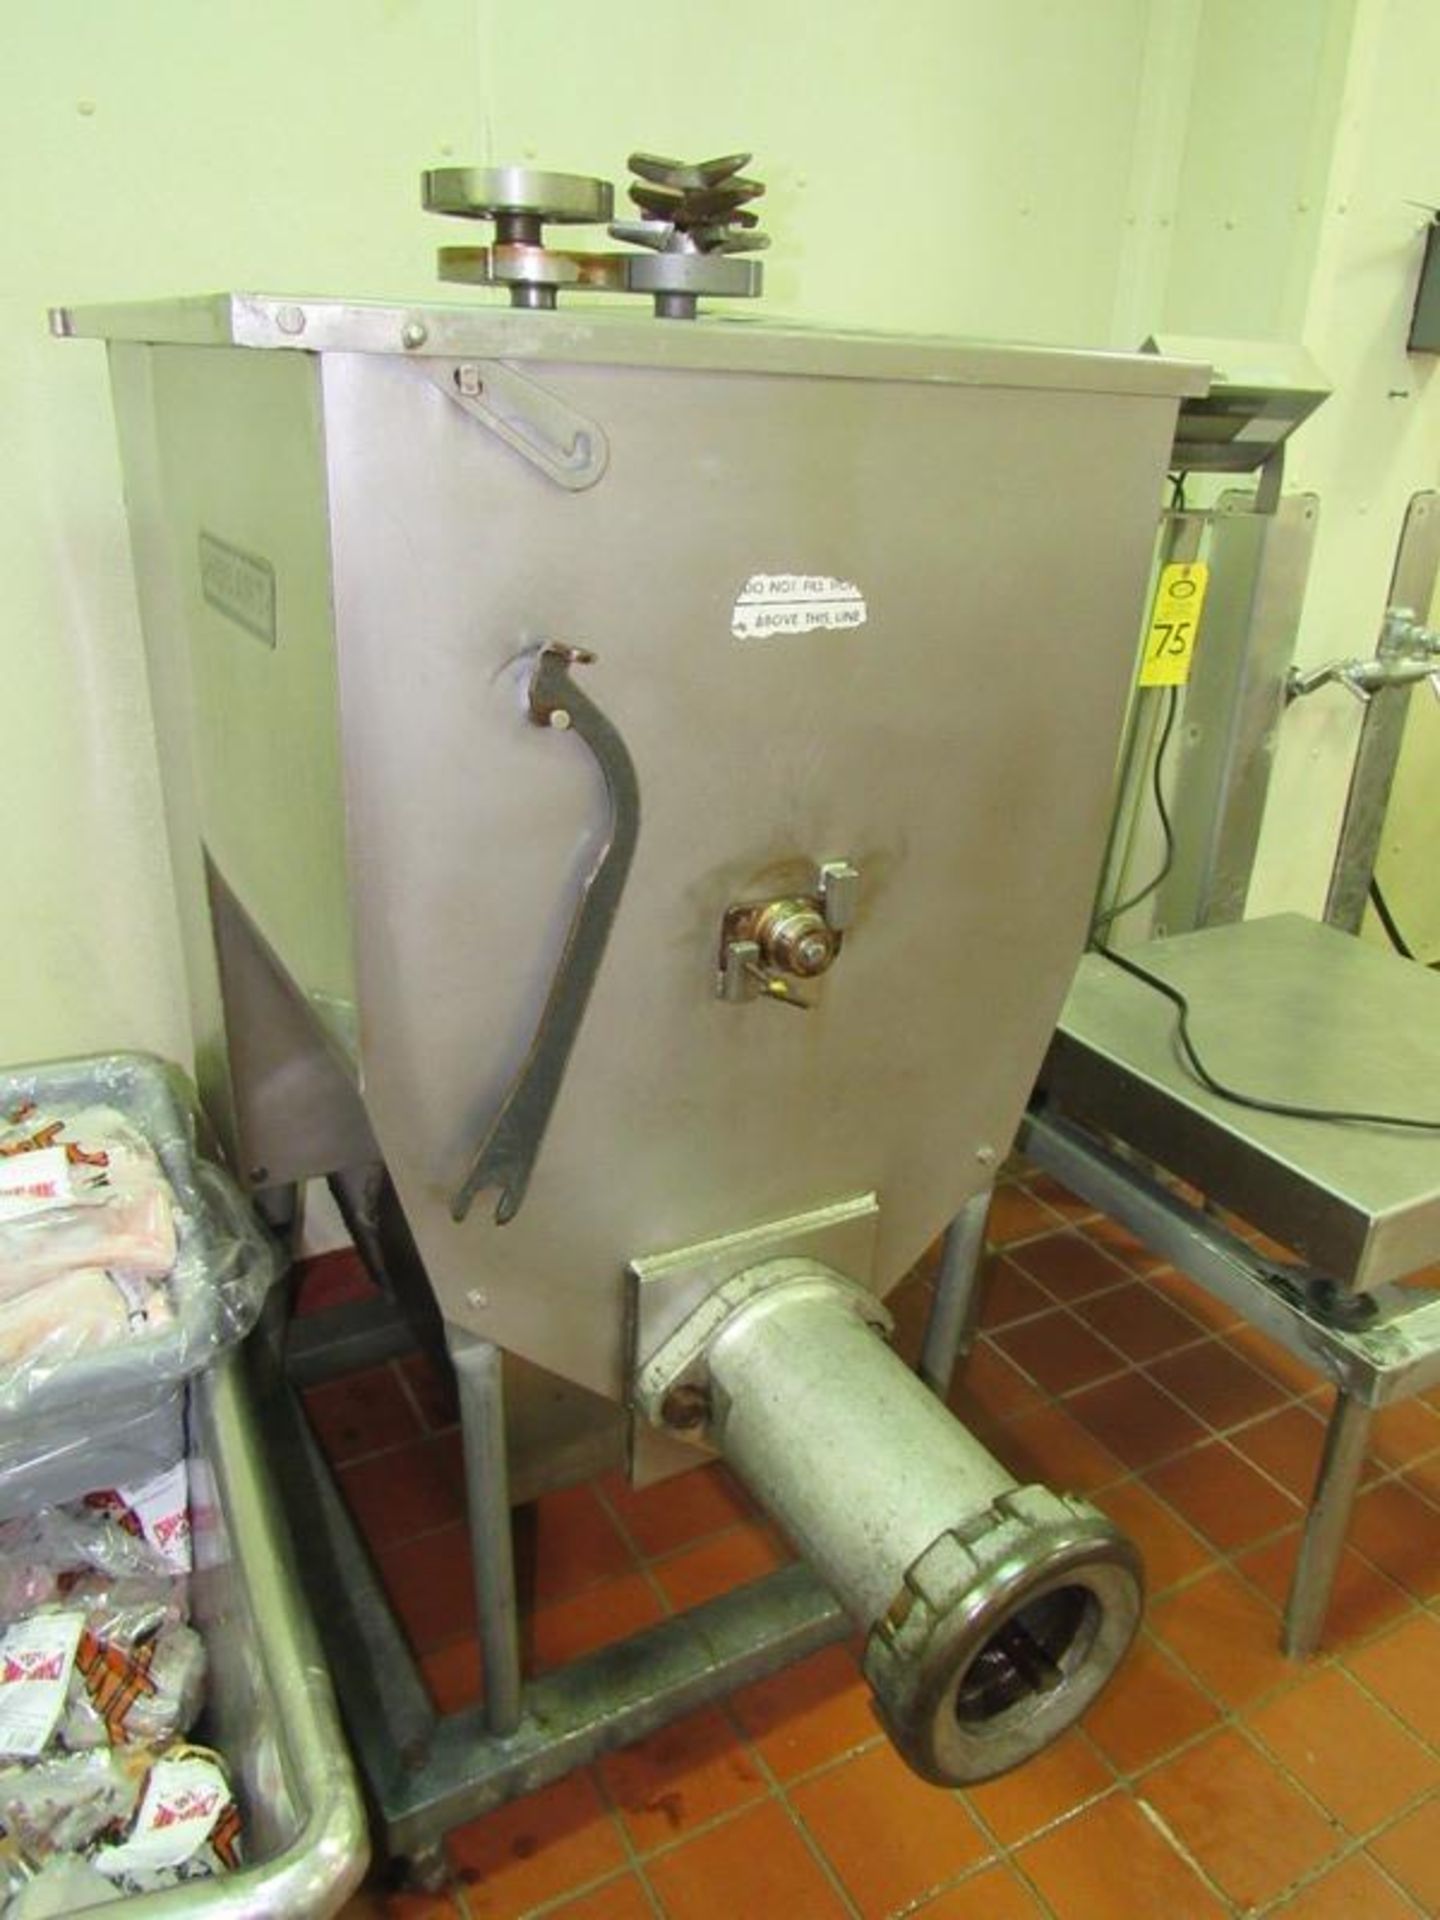 Hobart Mdl. 4352 Mixer/Grinder, 5" head, side automatic load port, foot pedal, 220 volts, 3 phase, - Image 2 of 7